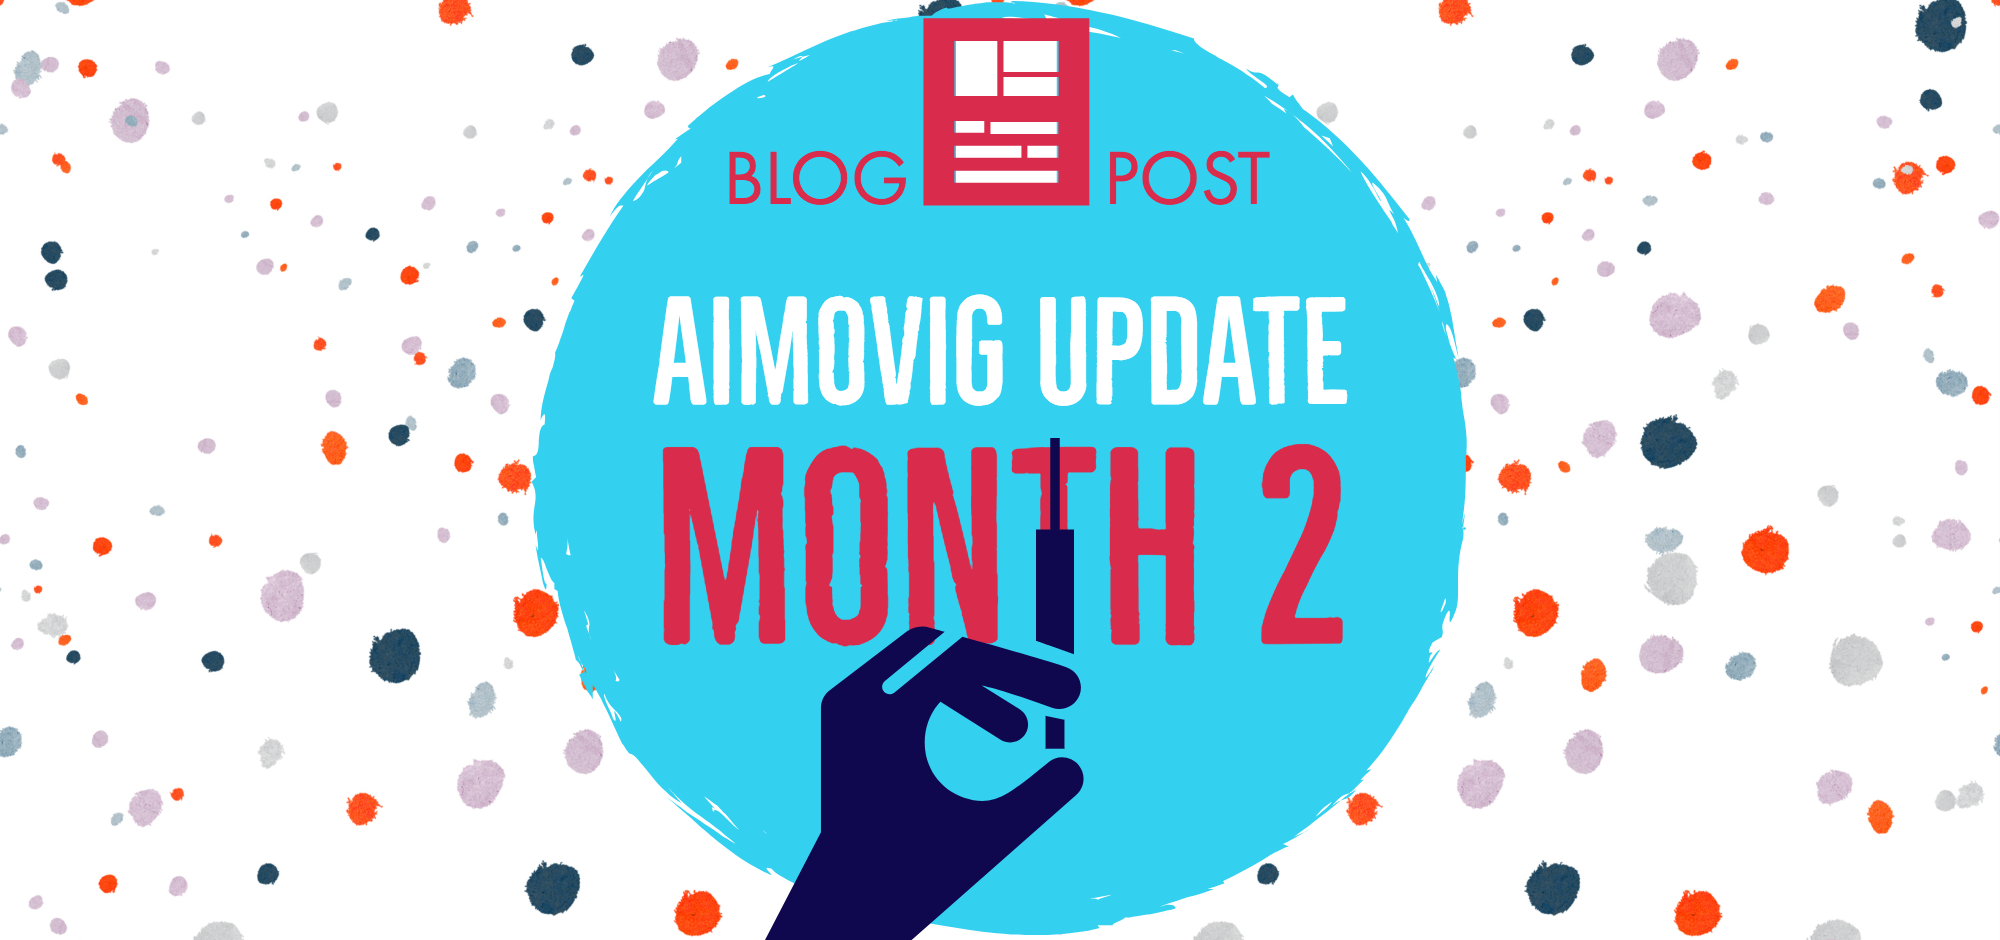 Aimovig Update Month 2